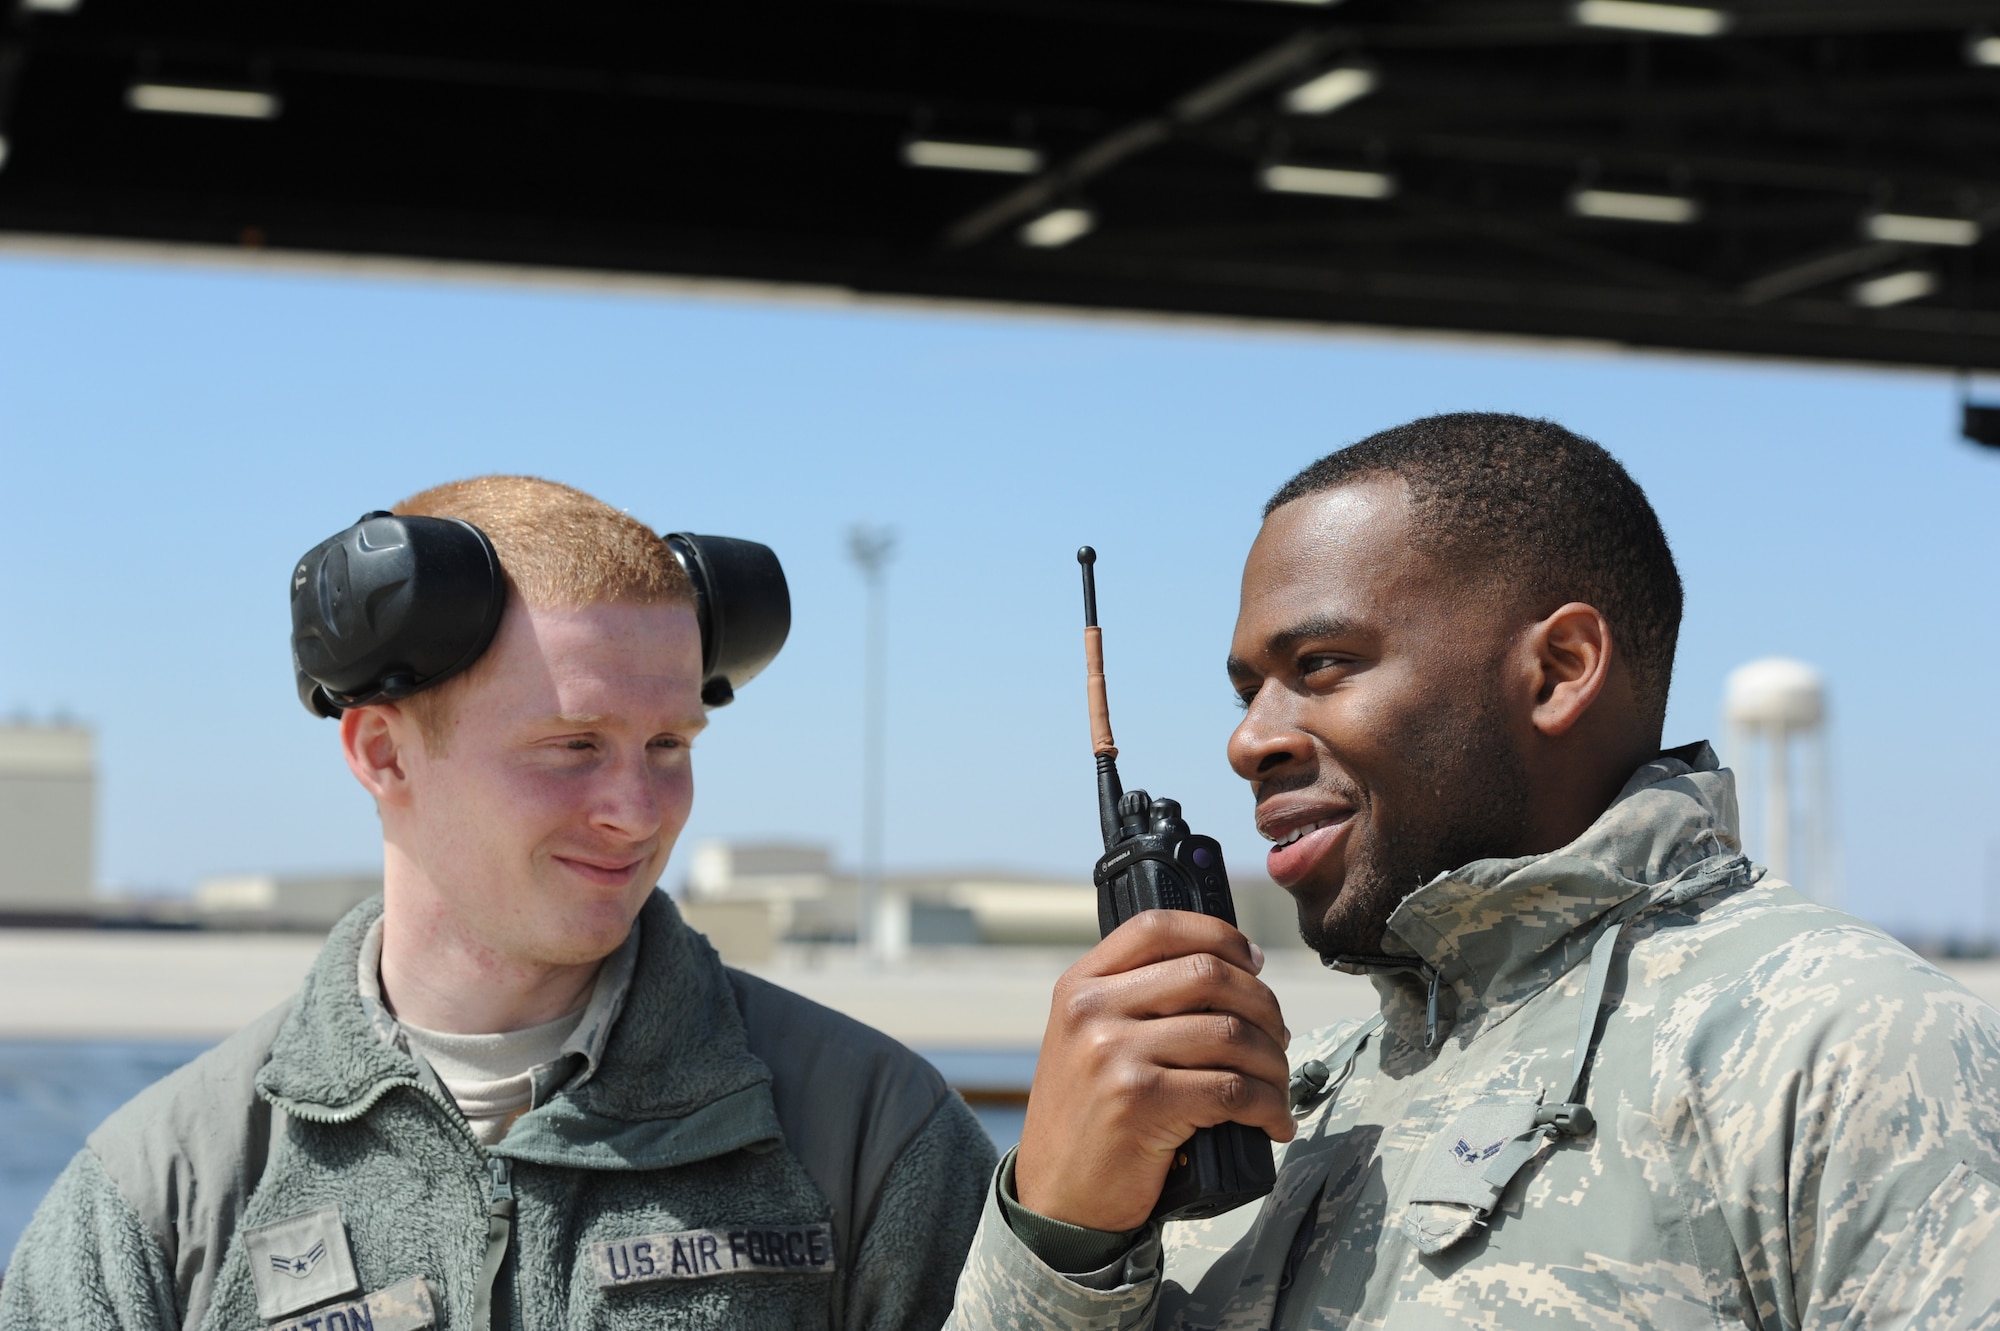 Airmen 1st Class James Fulton and Steven McCray and James Fulton, 13th Aircraft Maintenance Unit crew chiefs, notify the maintenance operations center that a B-2 Spirit they just marshaled is ready for flight, Whiteman Air Force Base, April 5, 2013. Fulton and McCray are two of more than 160 crew chiefs responsible for ensuring each B-2 assigned to Whiteman Air Force Base is mission-ready. (U.S. Air Force photo by Staff Sgt. Nick Wilson/Released)



